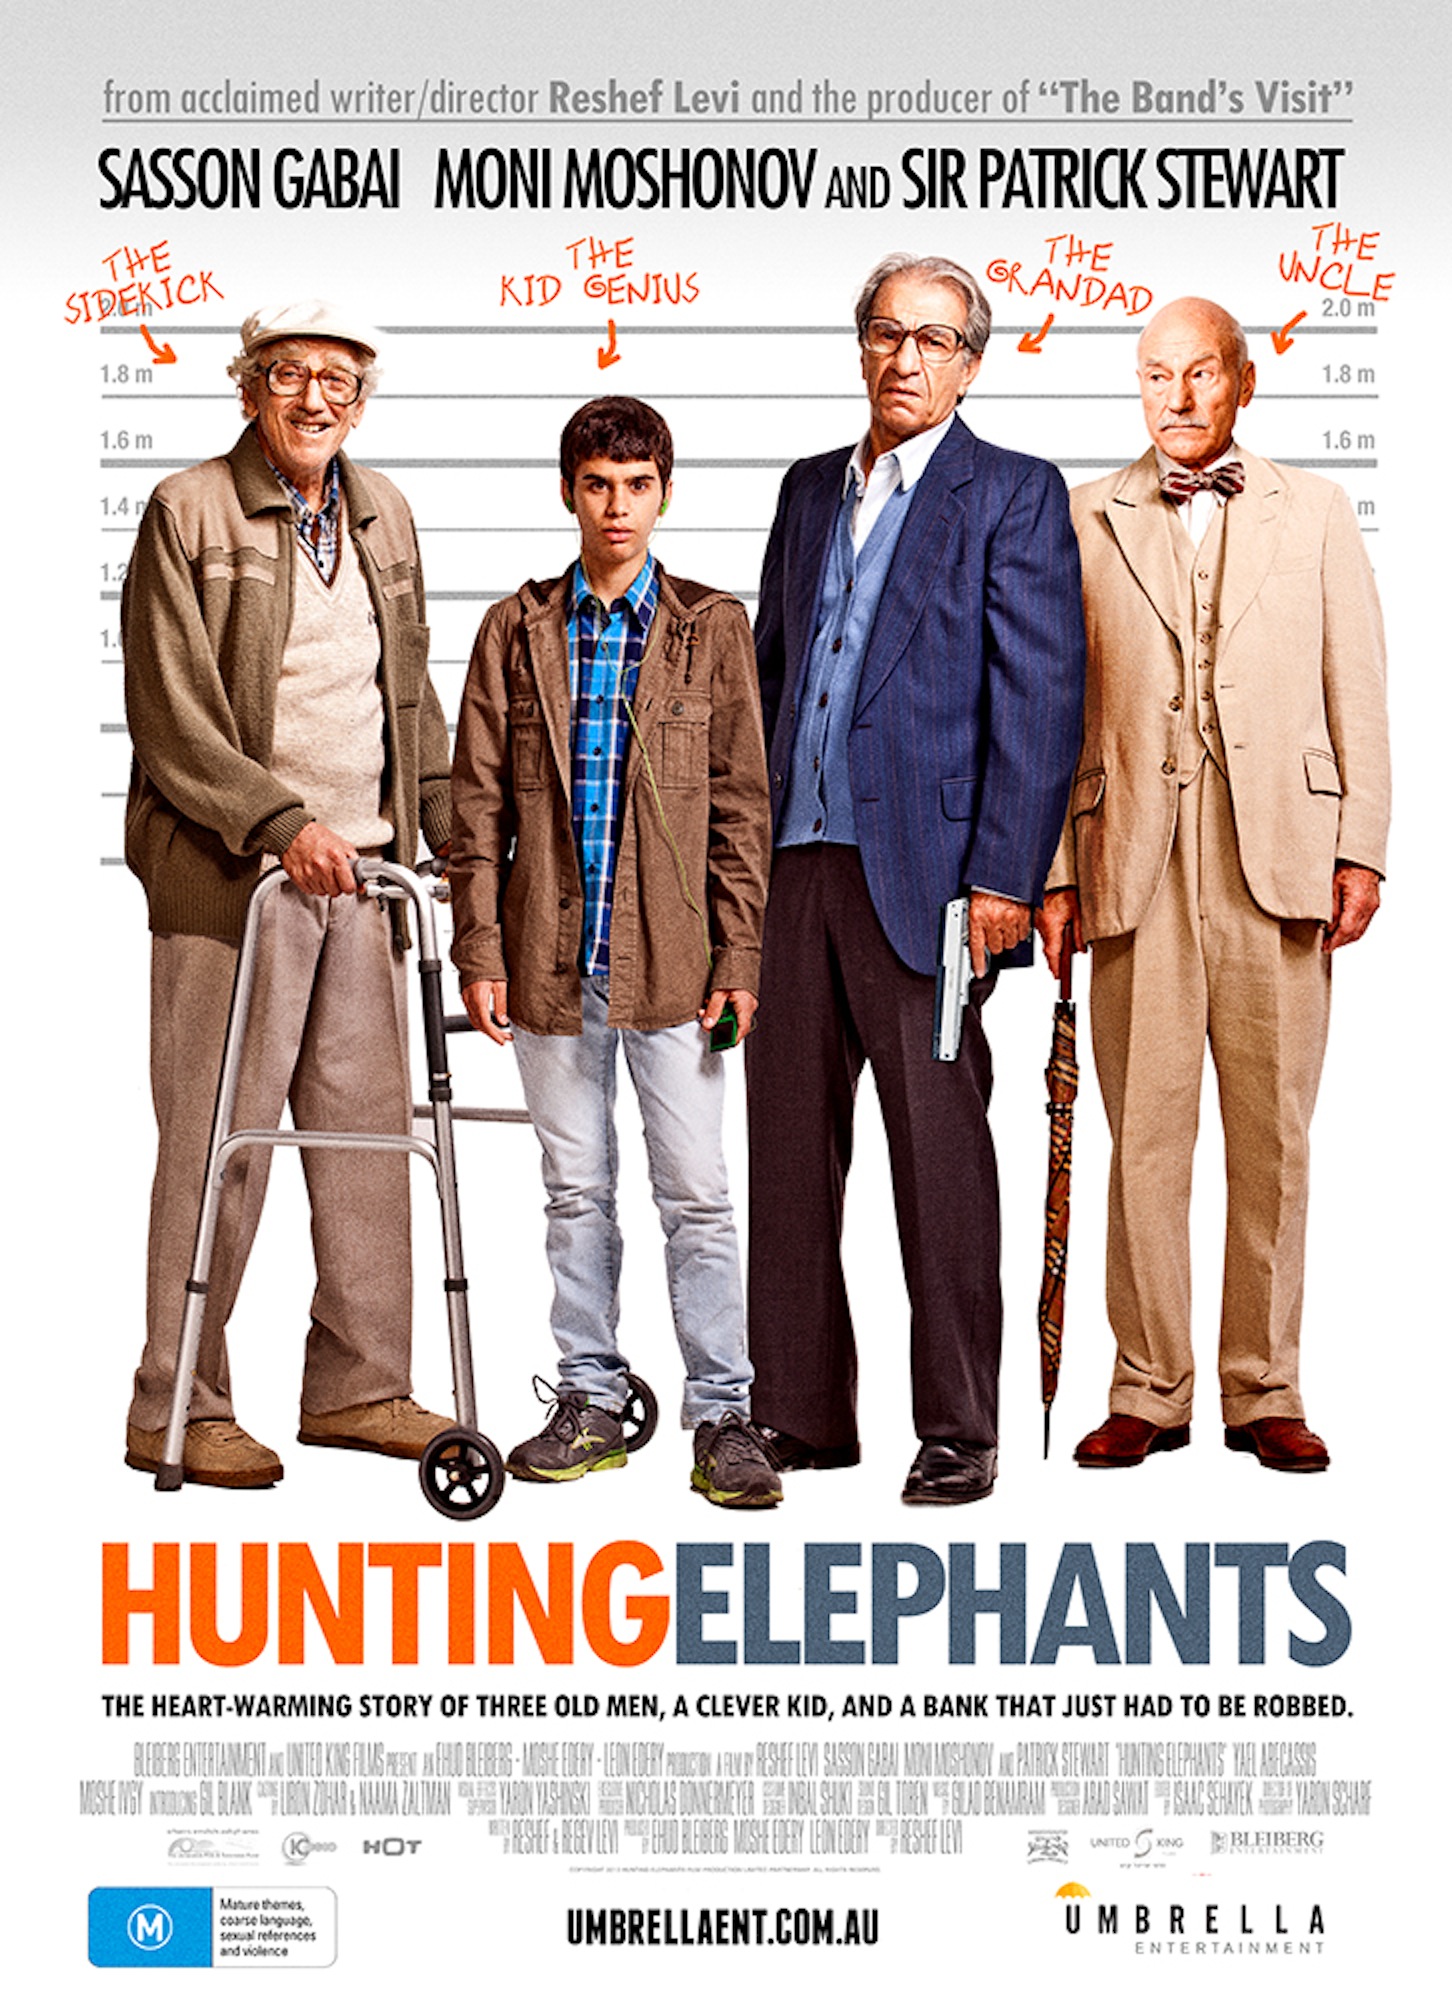 a-huntingelephants-image-for-wordpress-cover